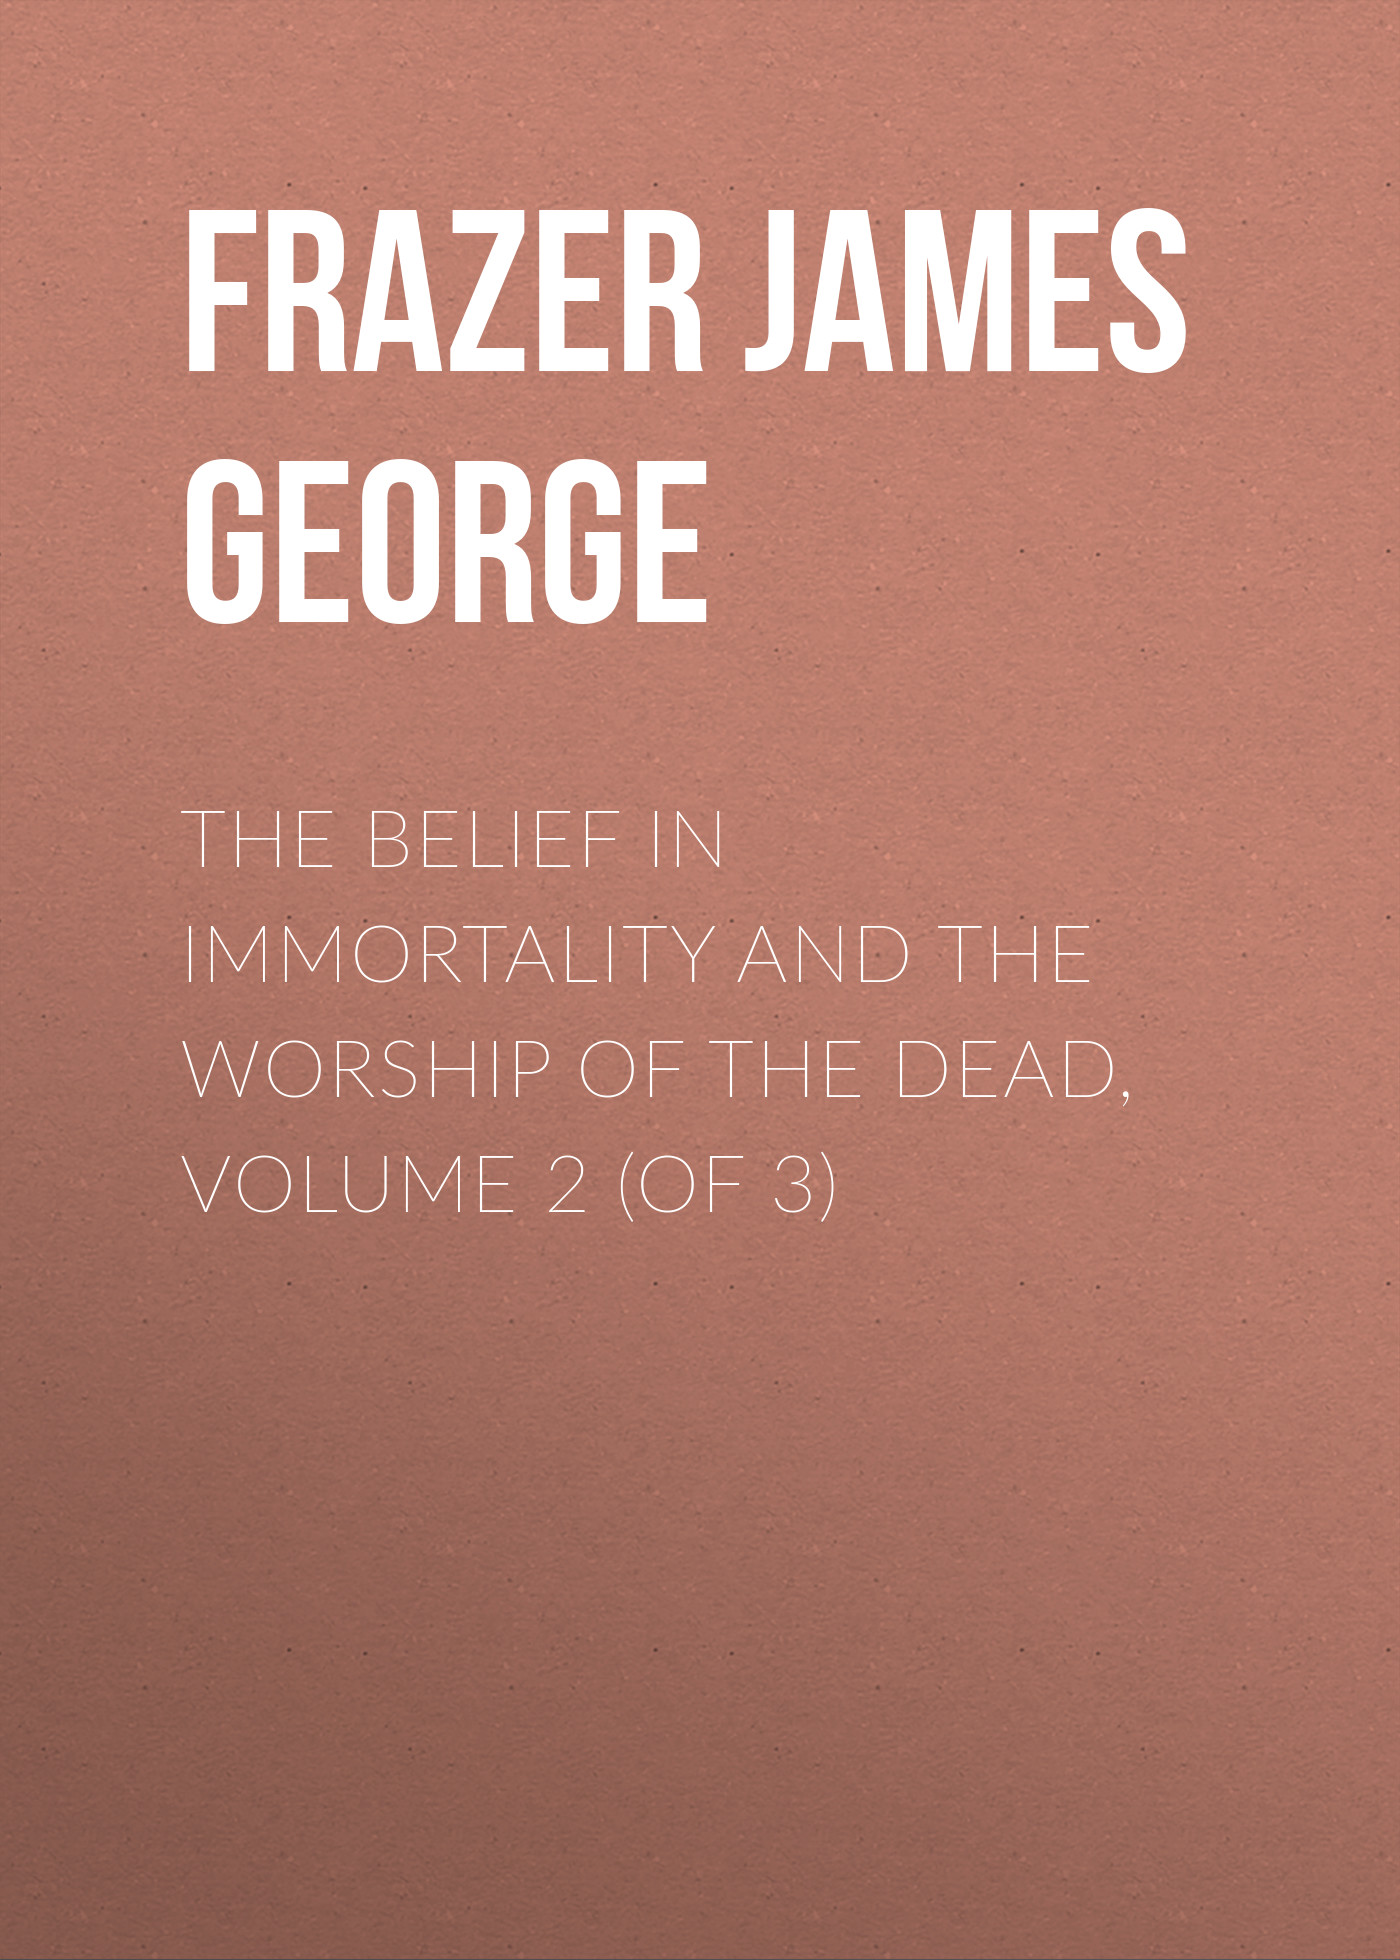 The Belief in Immortality and the Worship of the Dead, Volume 2 (of 3)